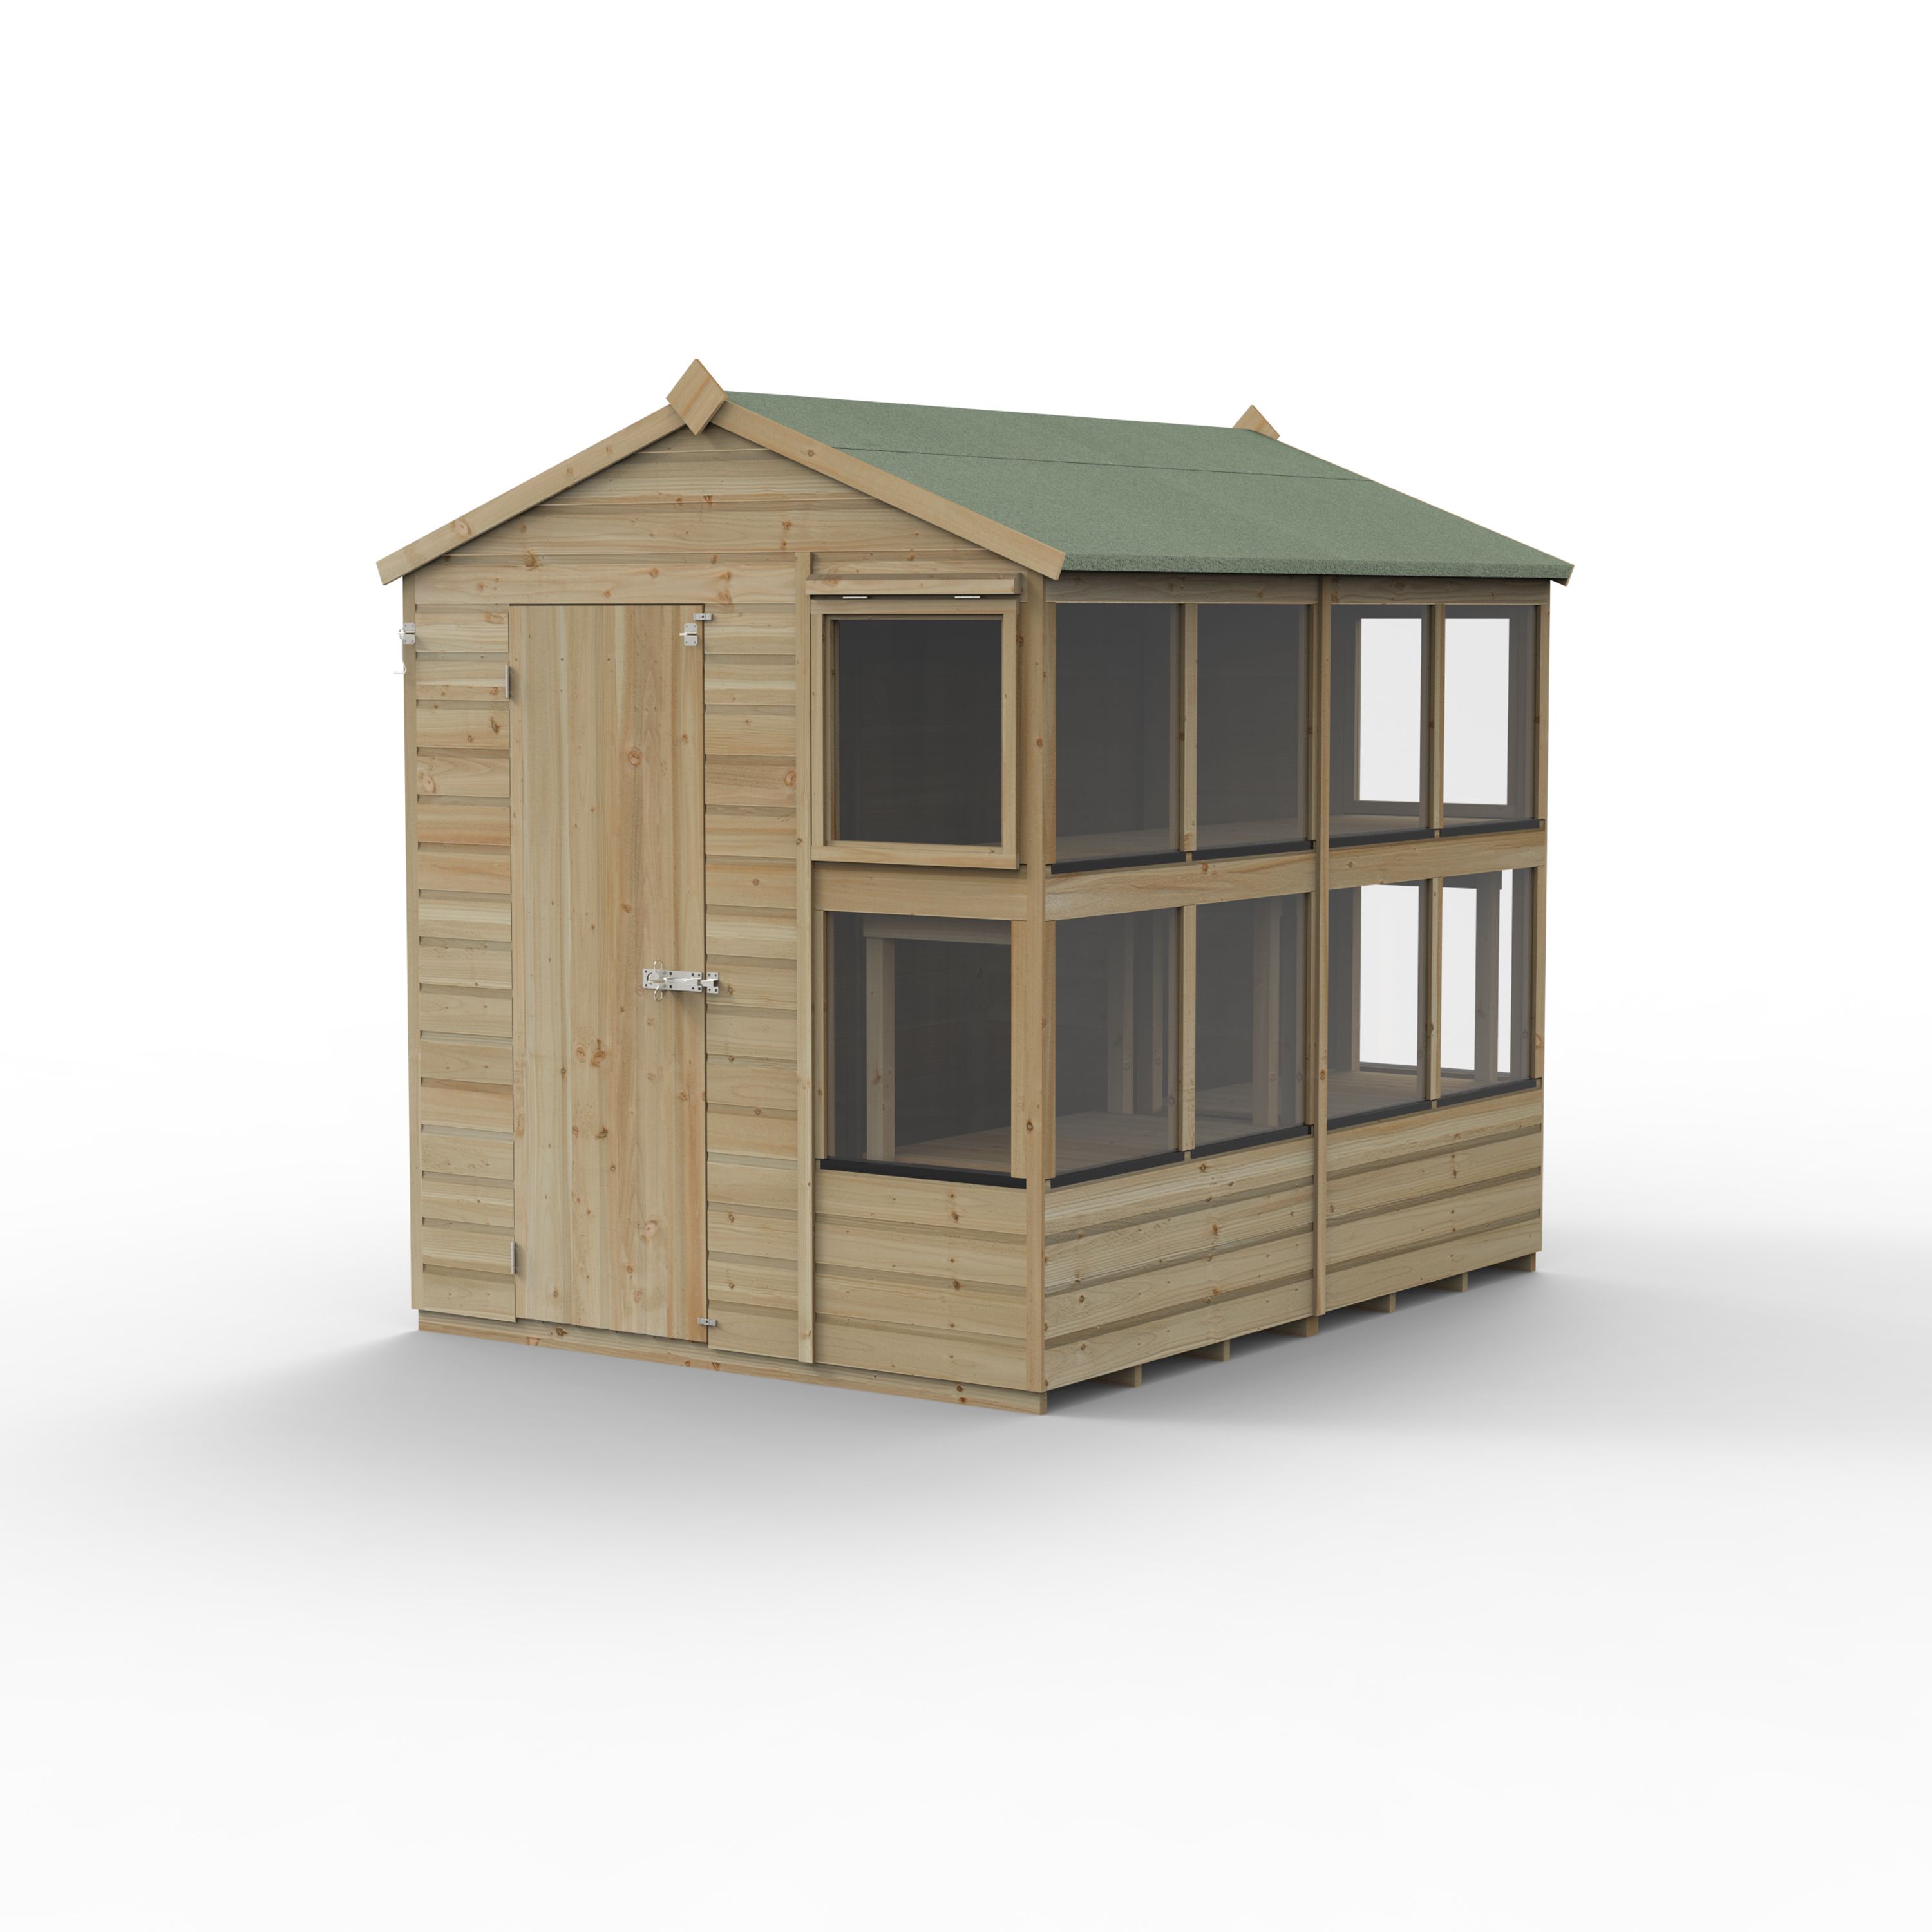 Forest Garden Beckwood 8x6 ft Apex Natural timber Wooden Potting shed with floor & 10 windows